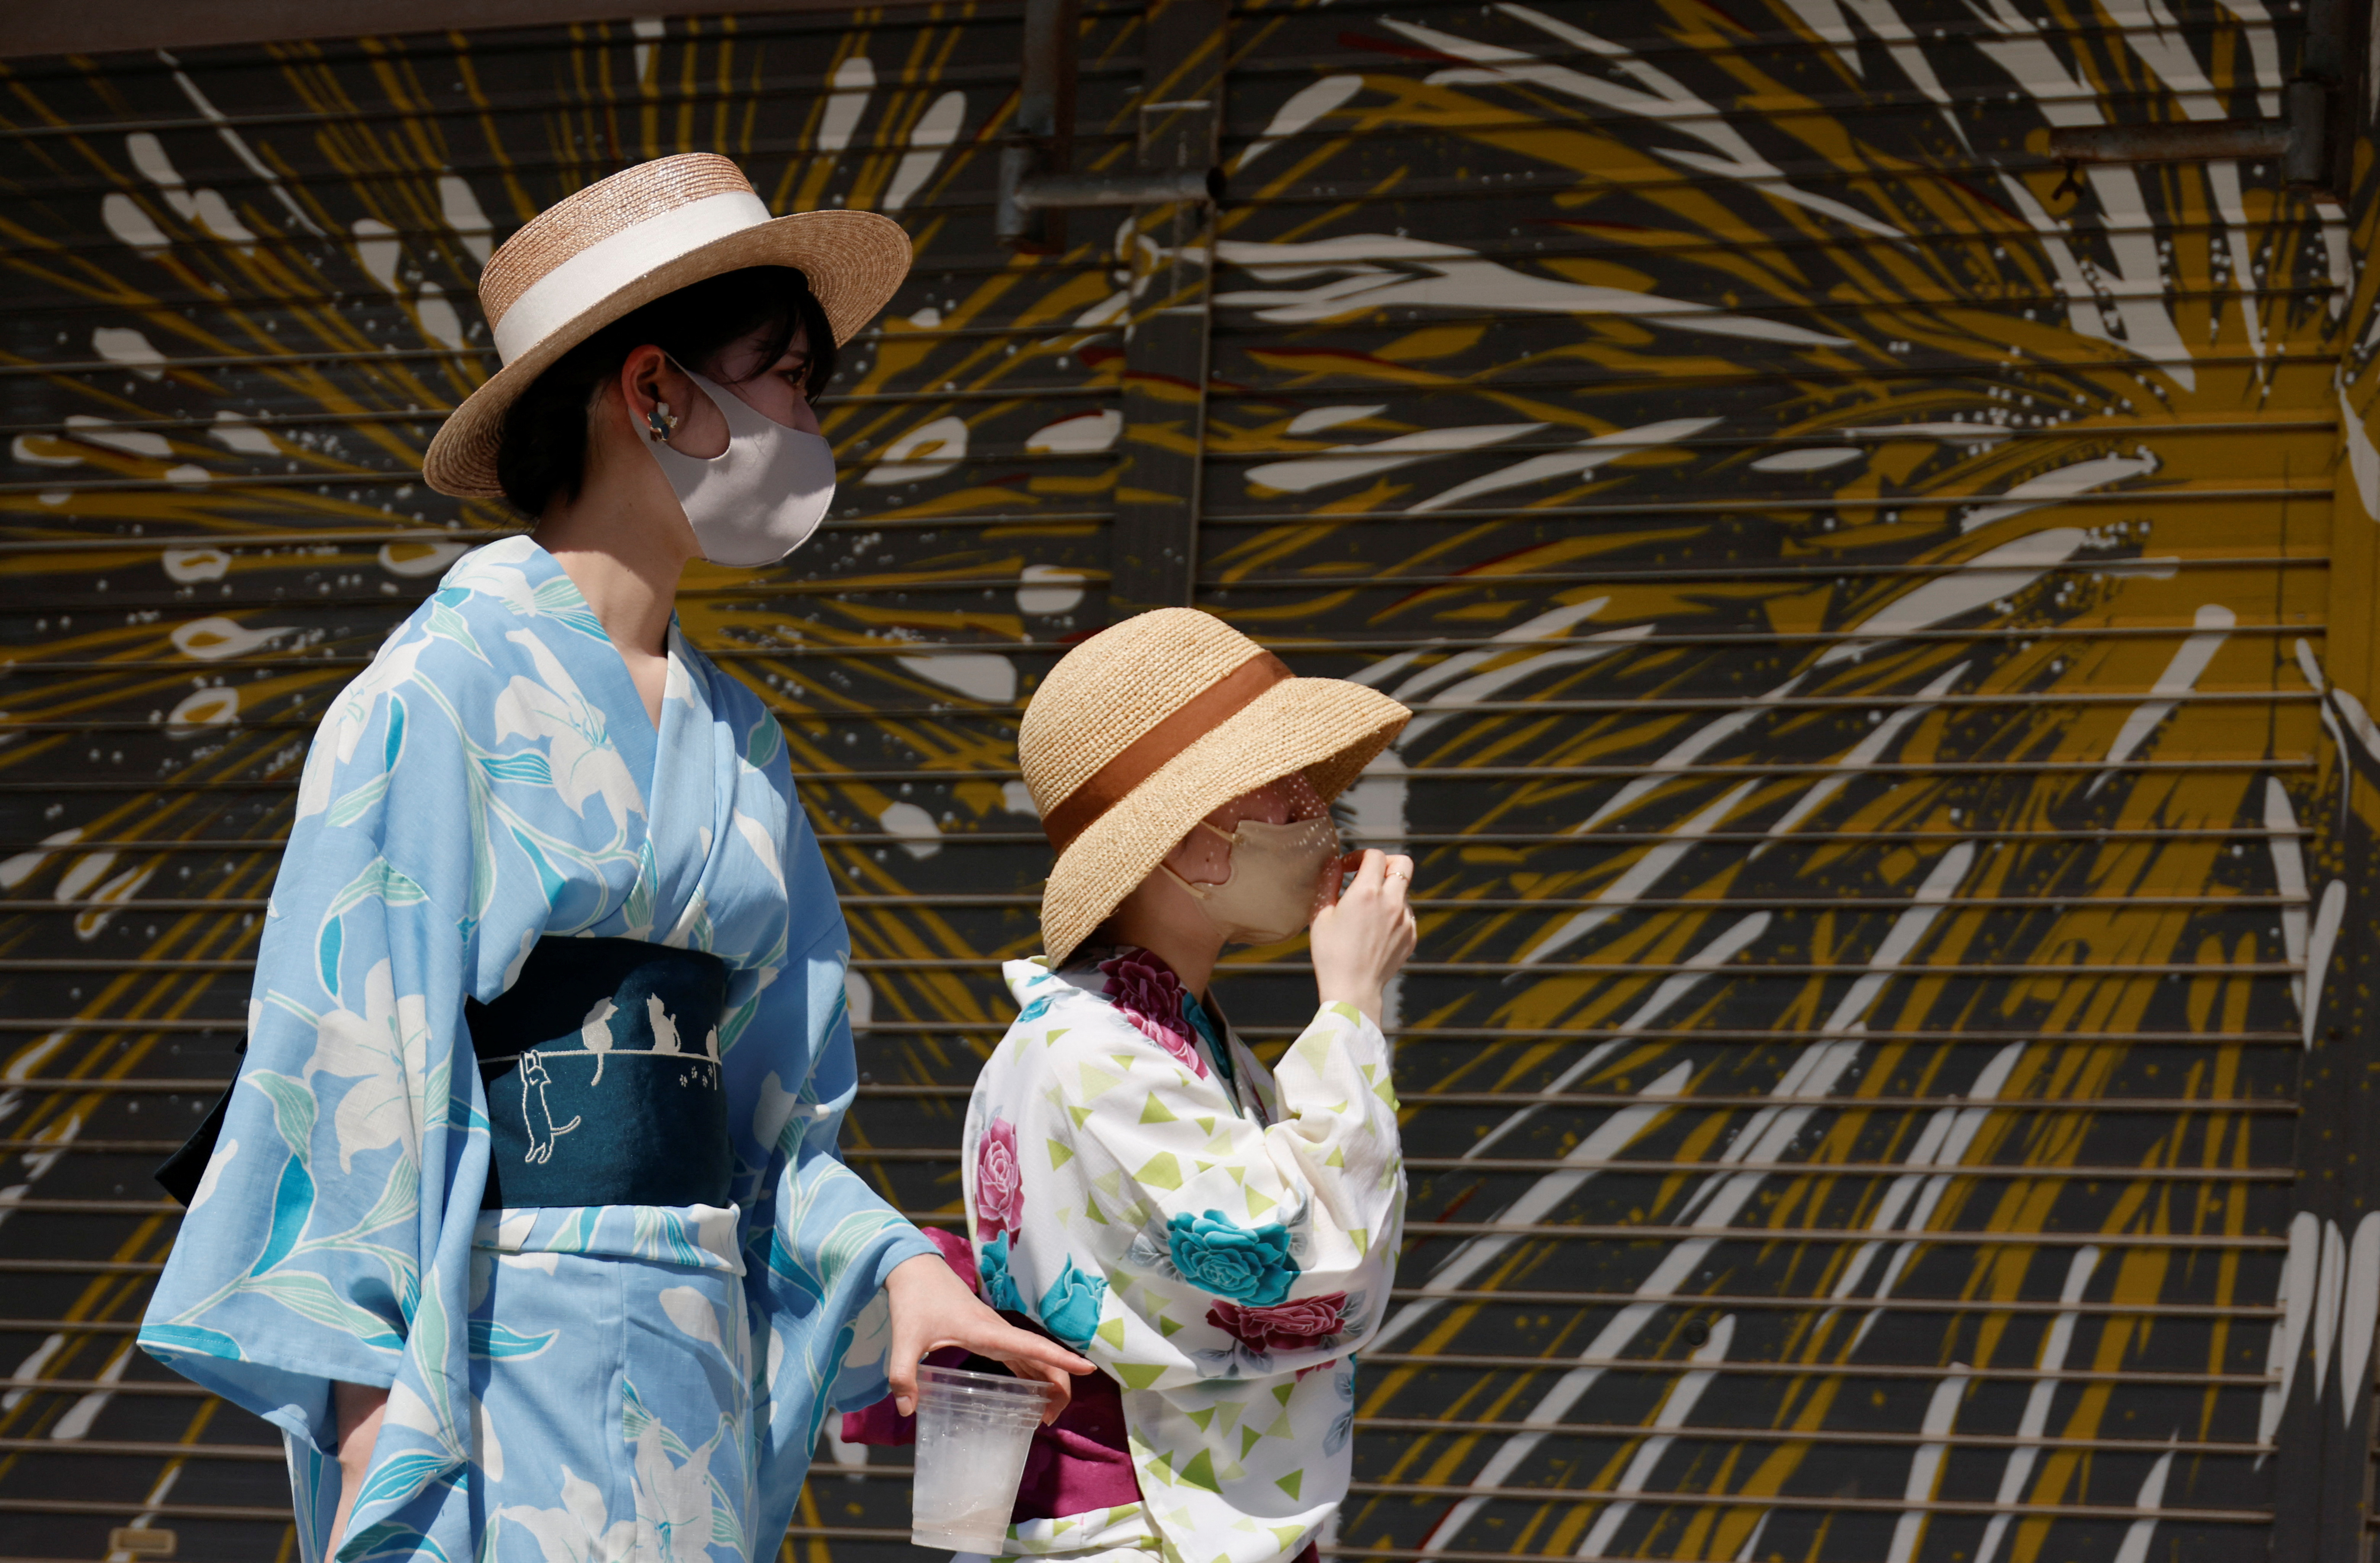 Women wearing summer kimonos and straw hats walk on the street as Japanese government issues warning over possible power crunch due to heatwave at Asakusa district in Tokyo